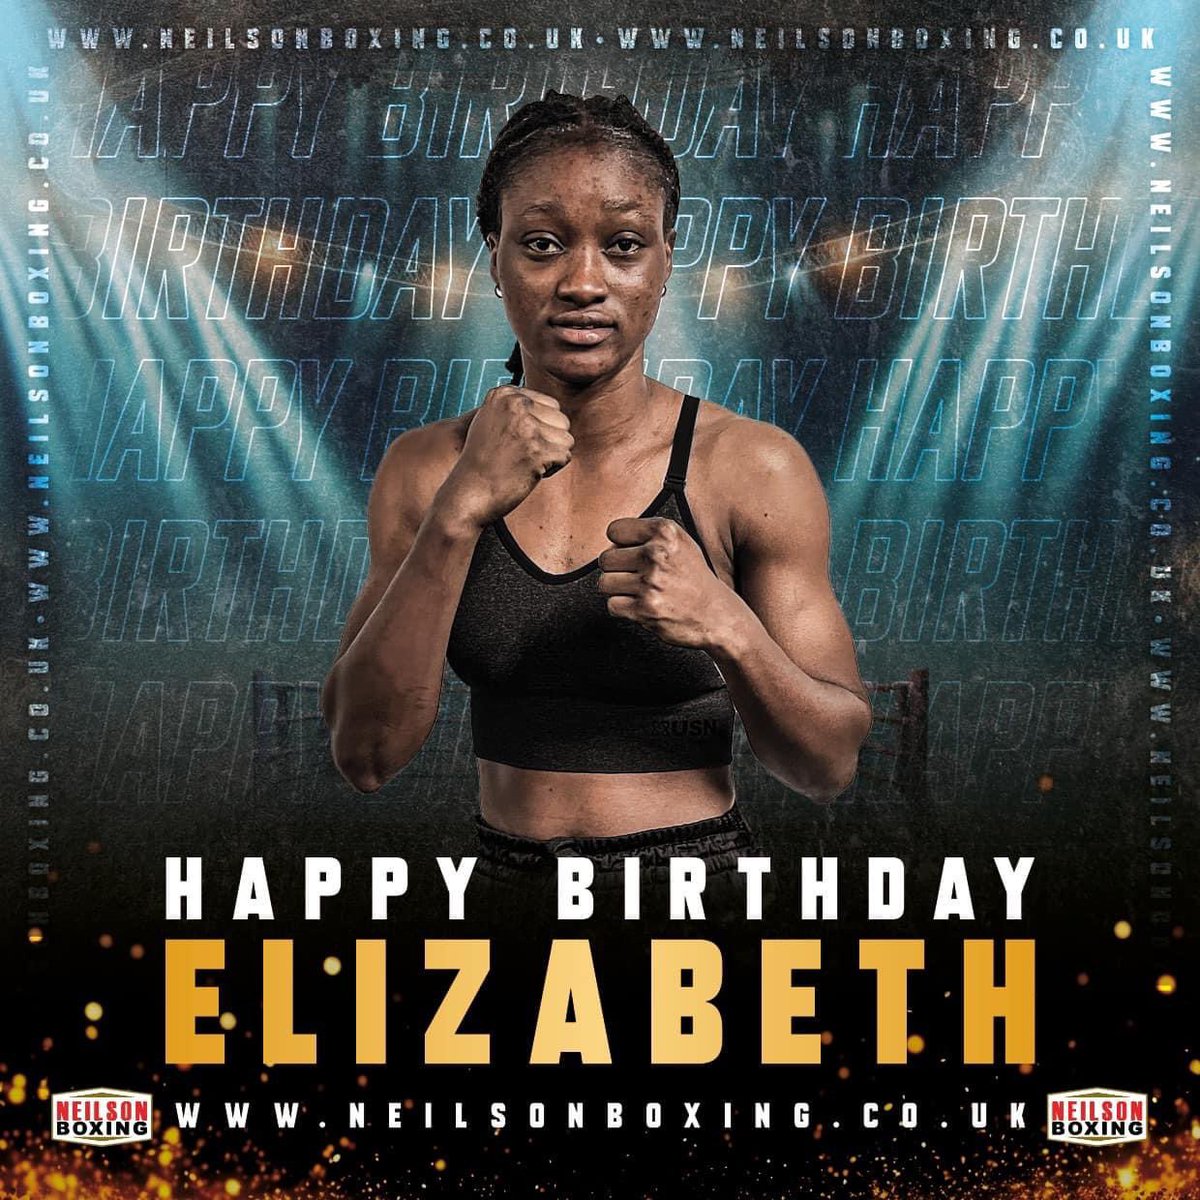 Everyone at Neilson Boxing would like to wish WBC Silver and IBO International champ @ElizabethOshoba a very big happy birthday! Enjoy your day Champ 🥳